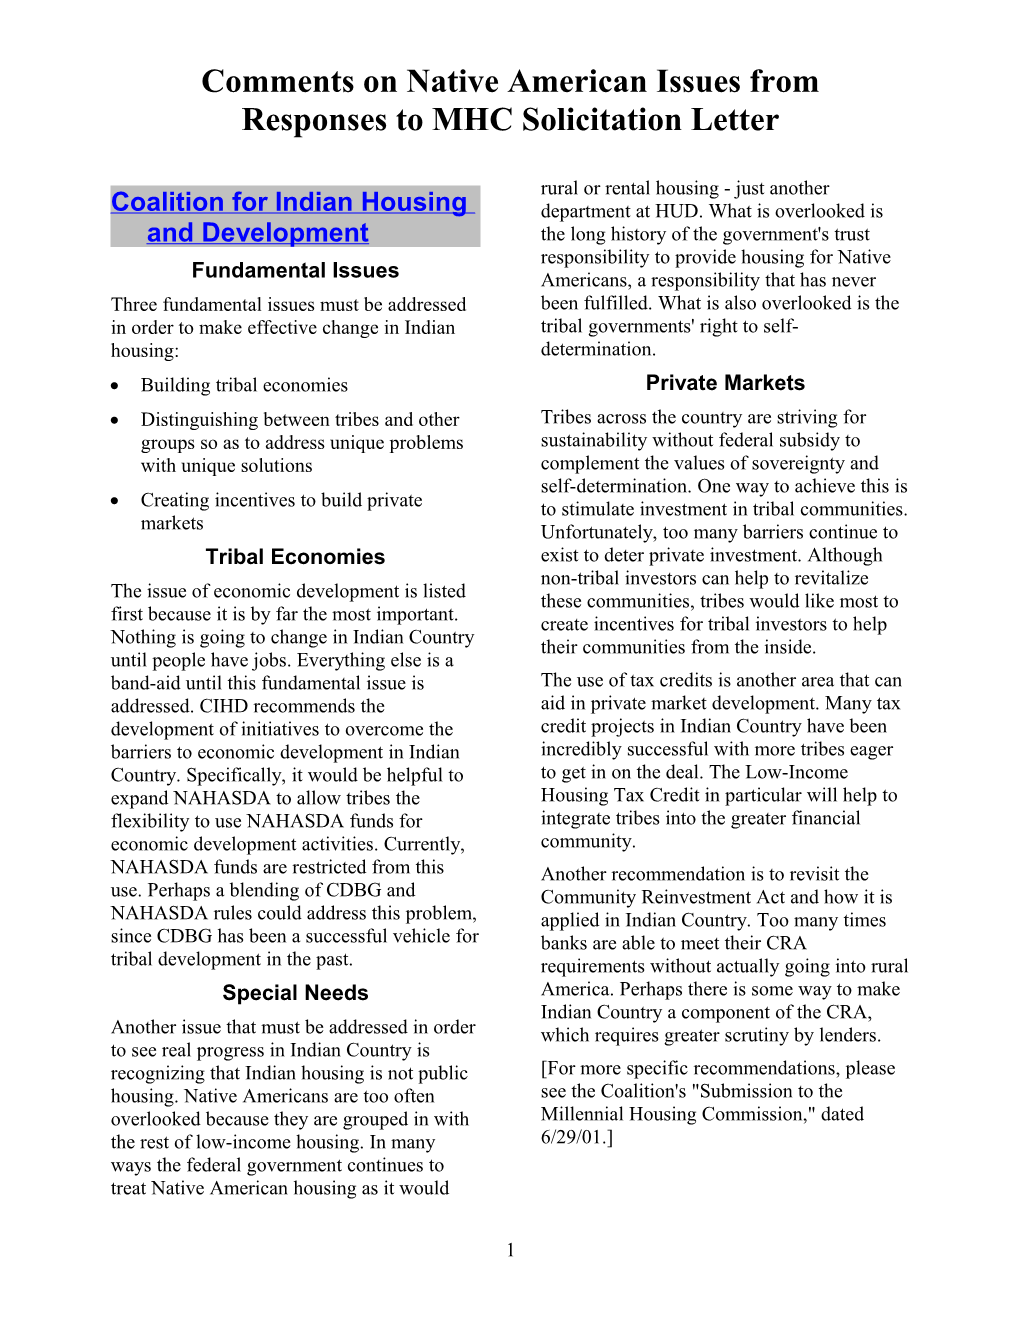 Coalition For Indian Housing And Development